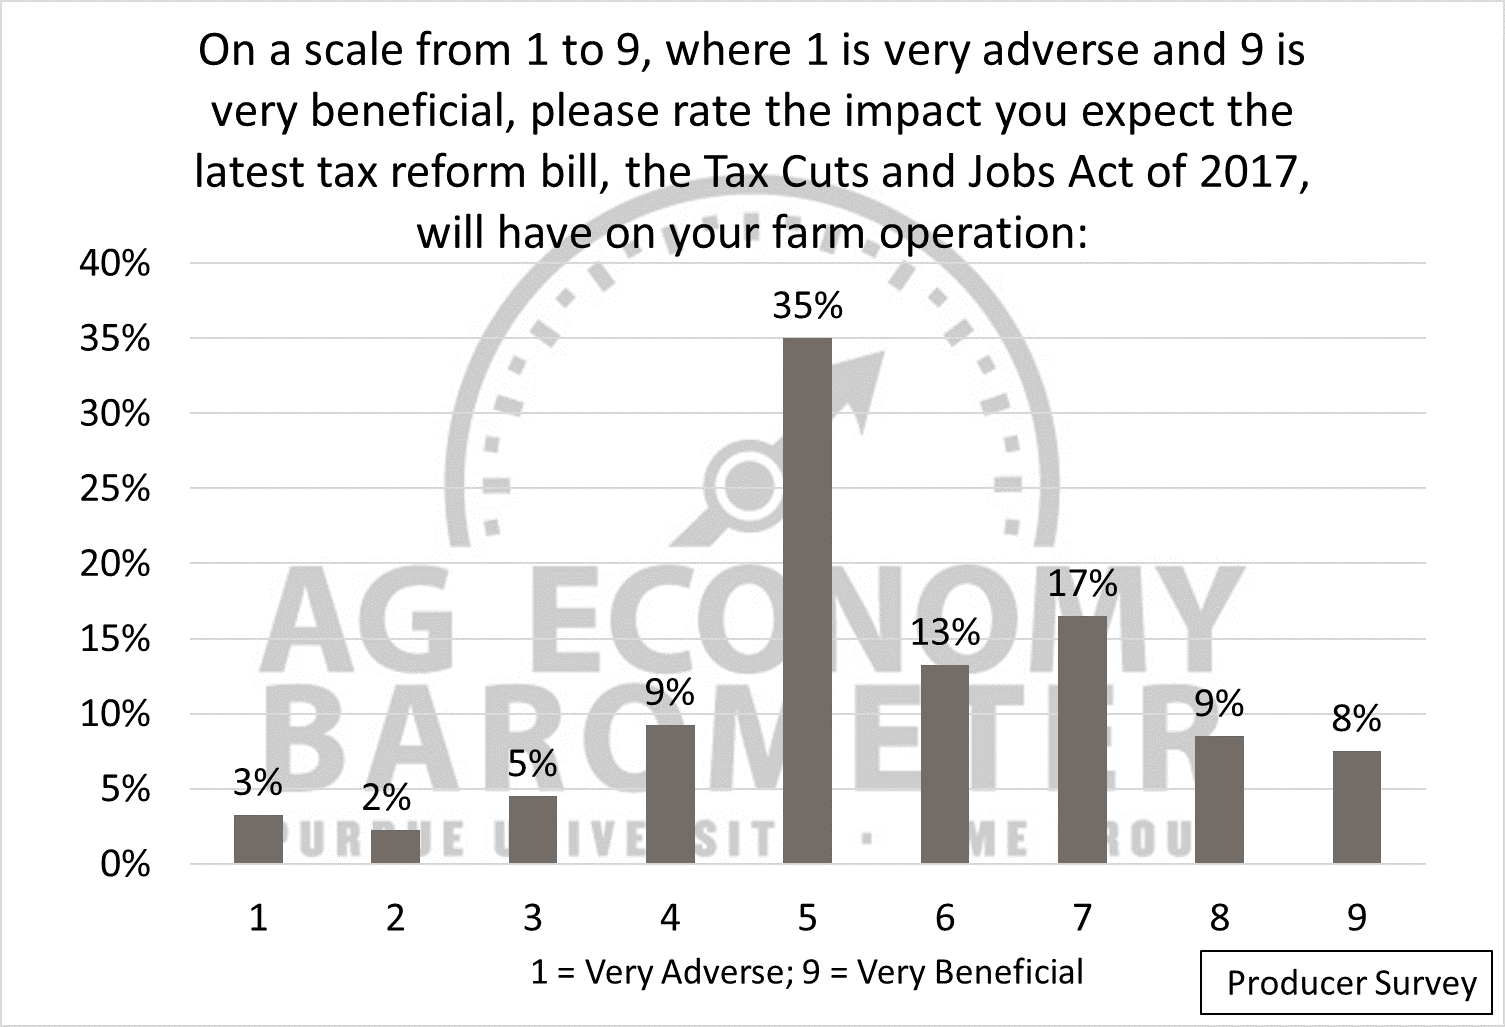 Figure 4. Rating of the Tax Cuts and Job Act of 2017 impacts on respondents’ farm operations.